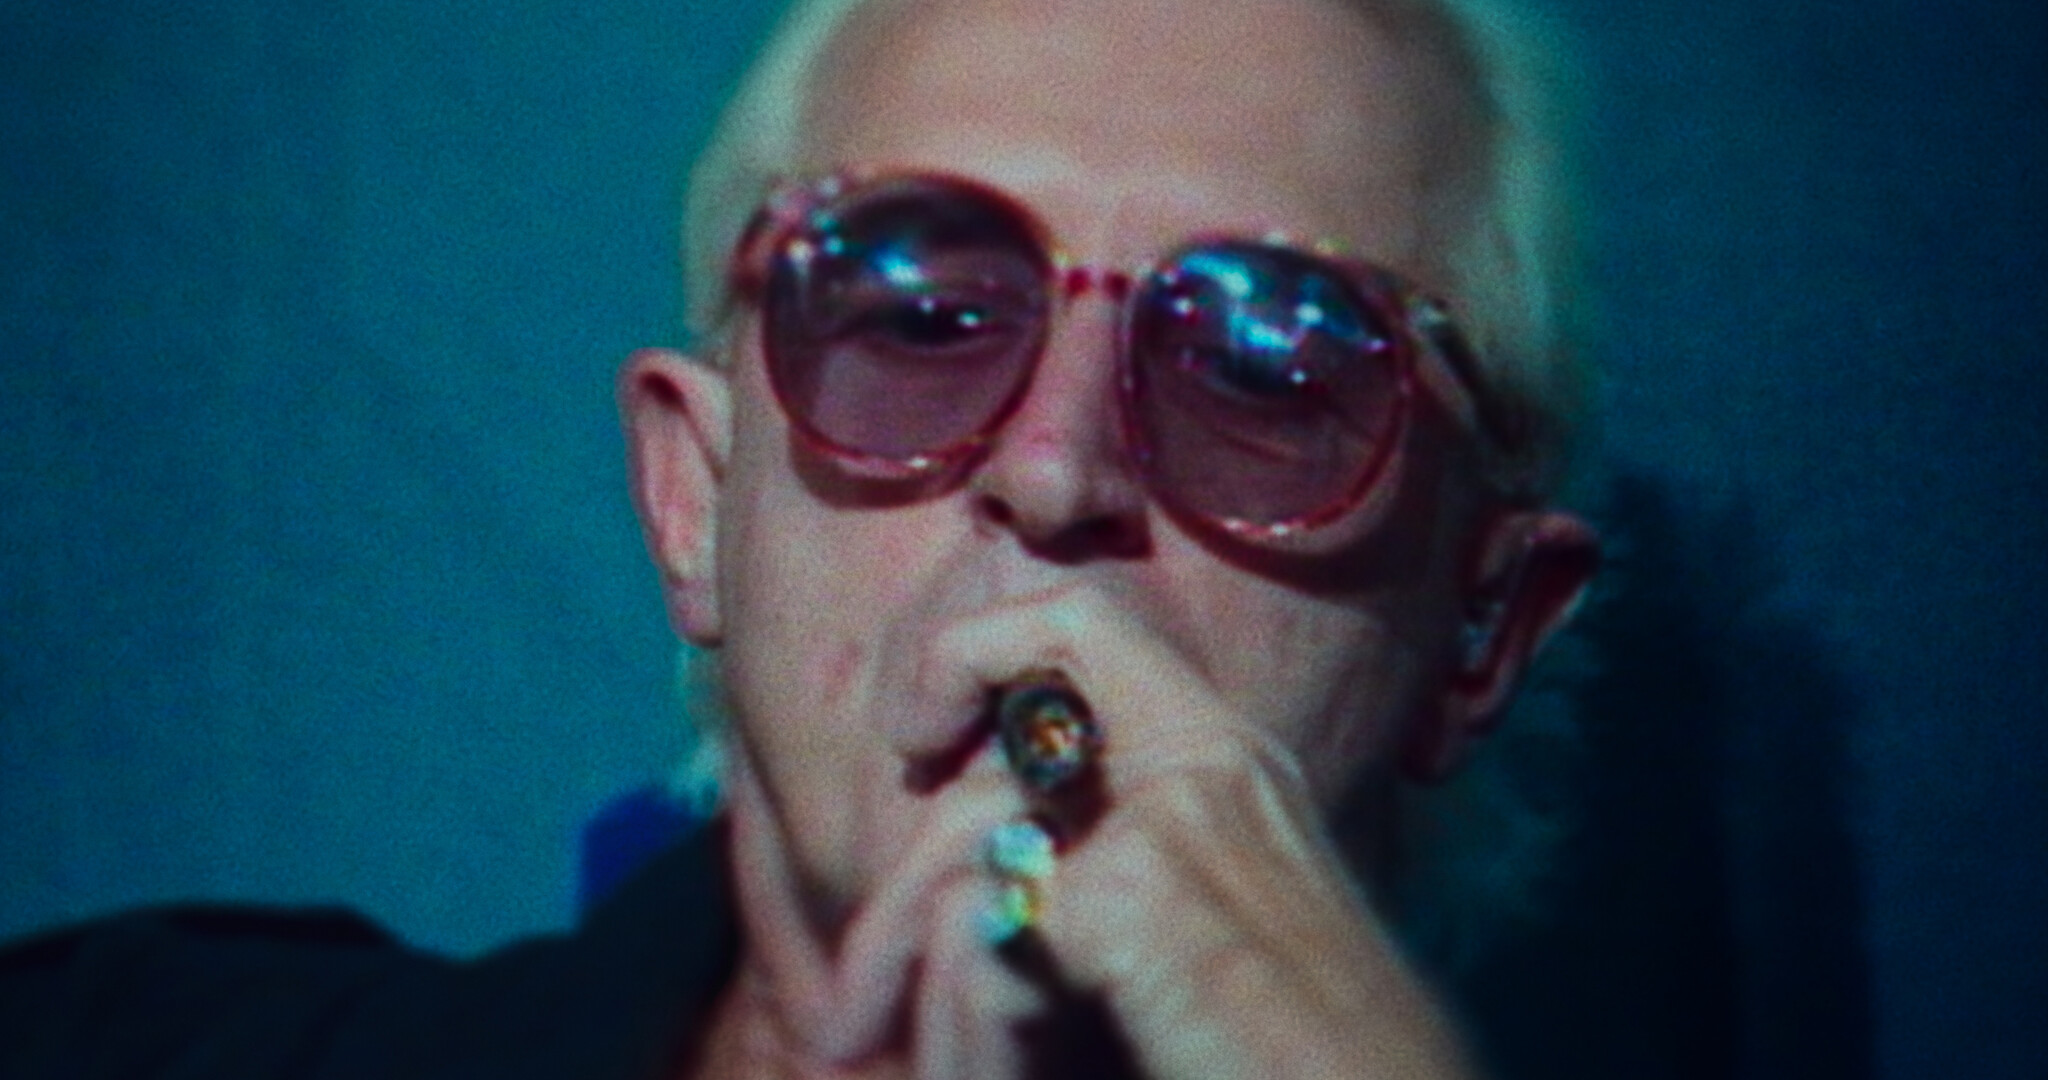 Who Was Jimmy Savile and What Crimes Did He Commit?